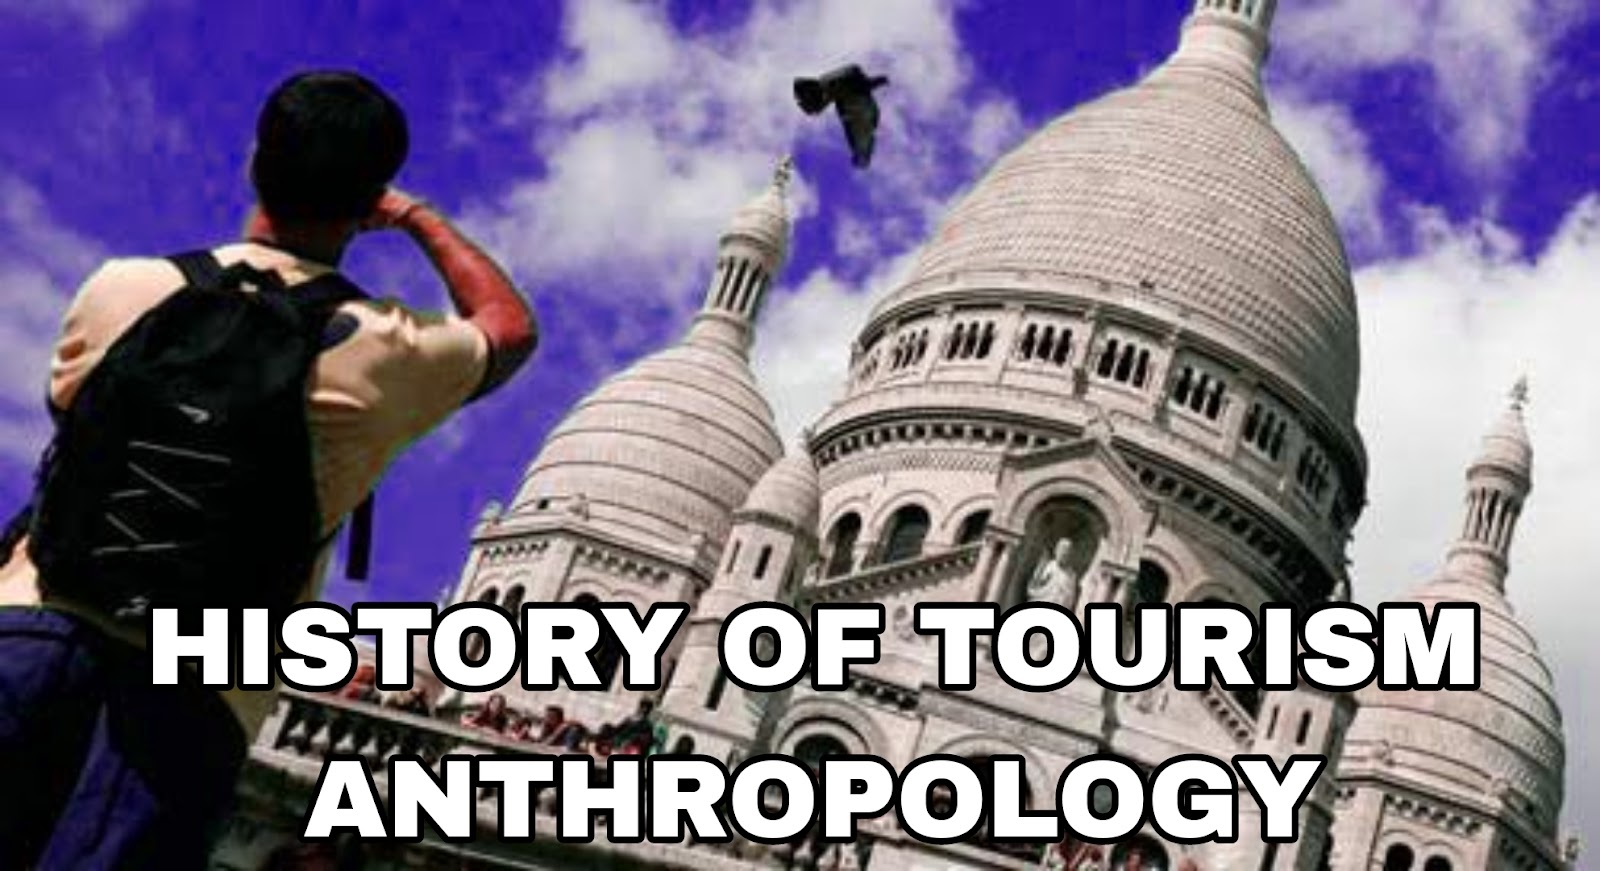 anthropology of tourism notes